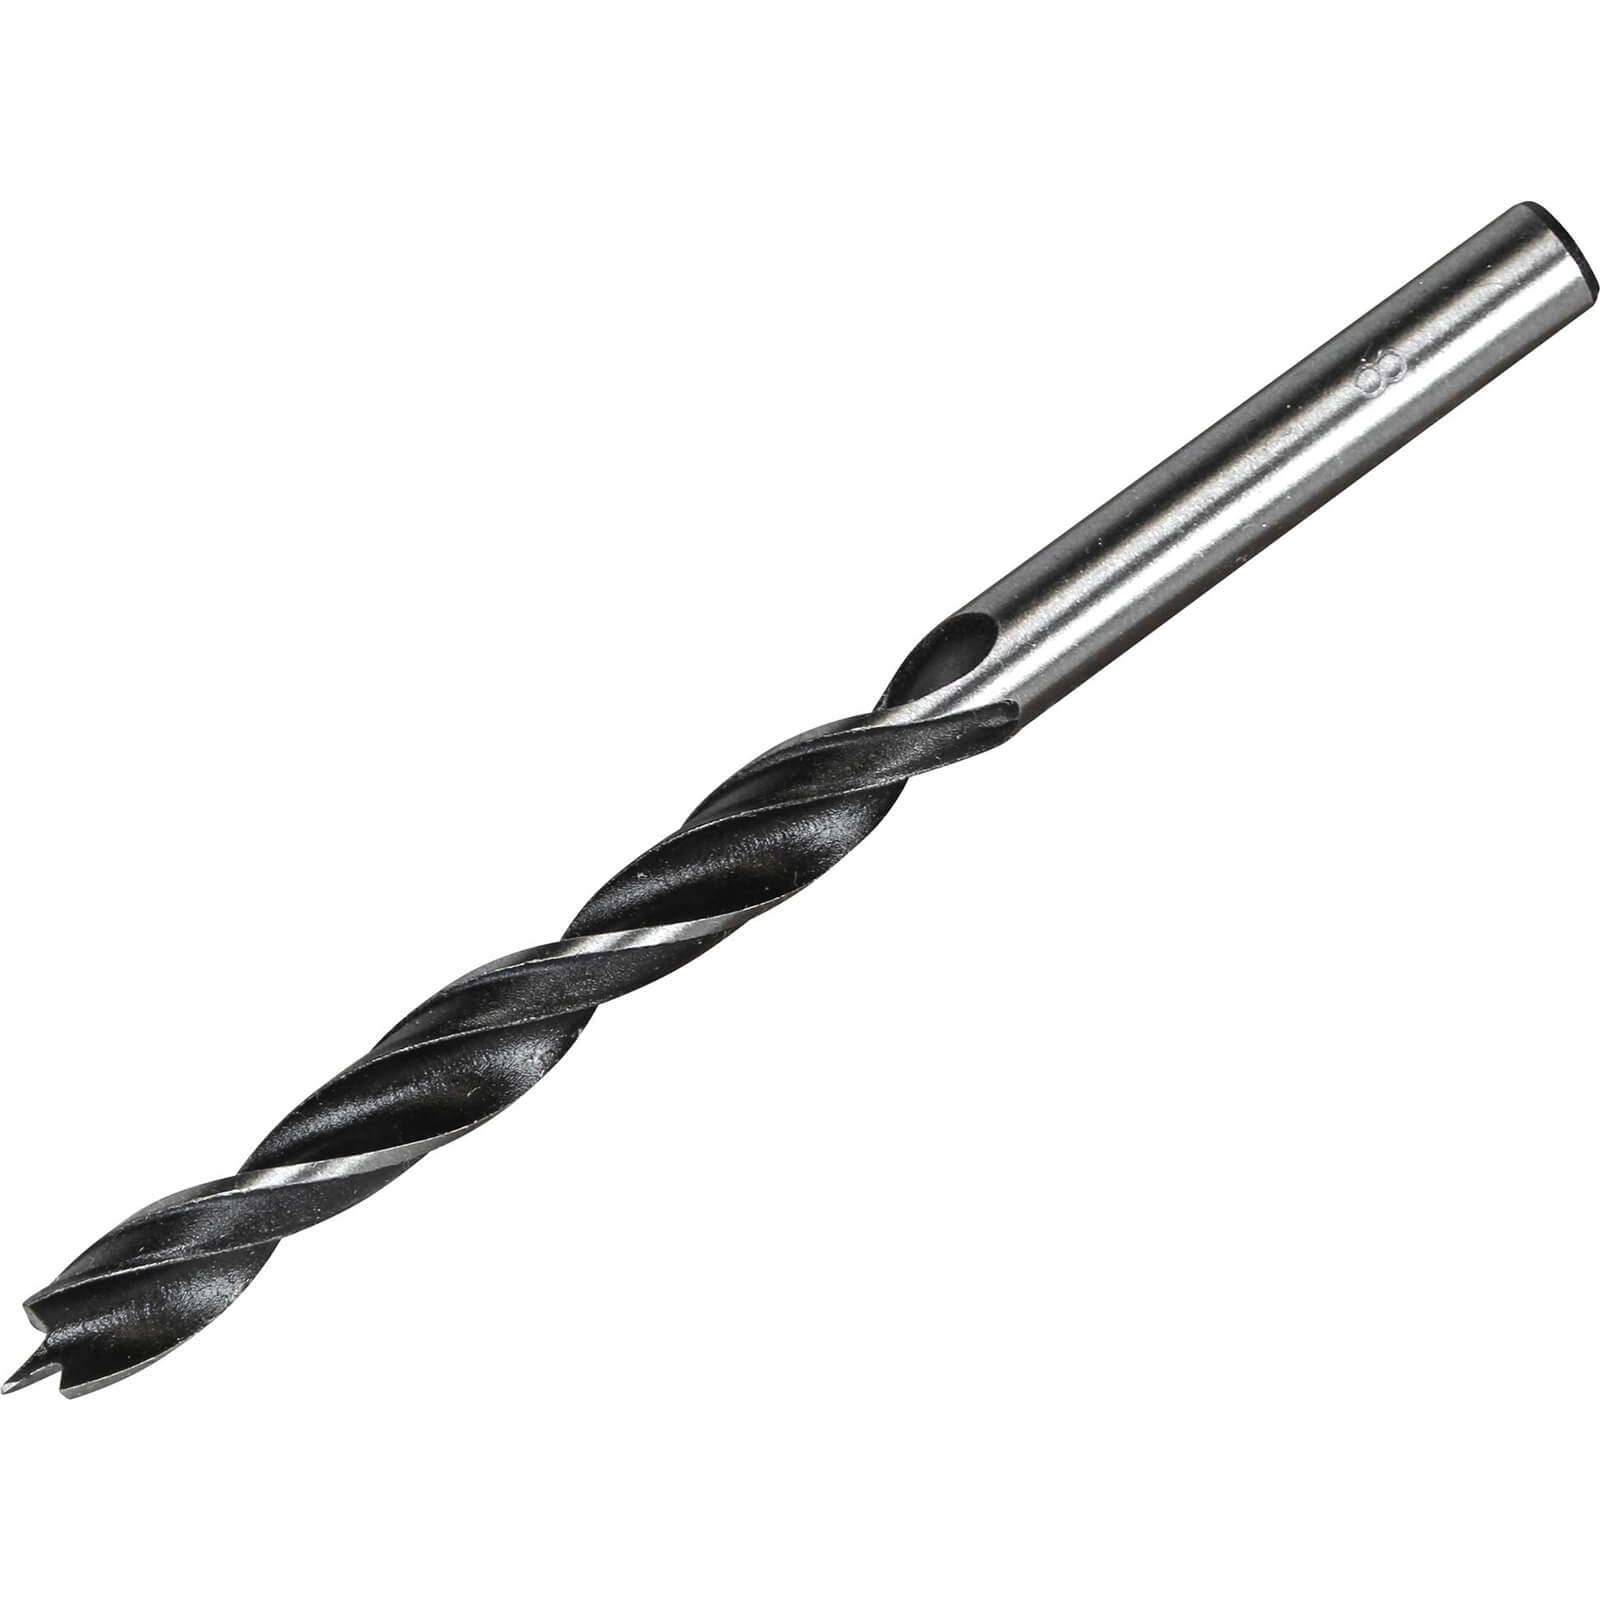 Image of Faithfull Lip and Spur Wood Drill Bit 8mm